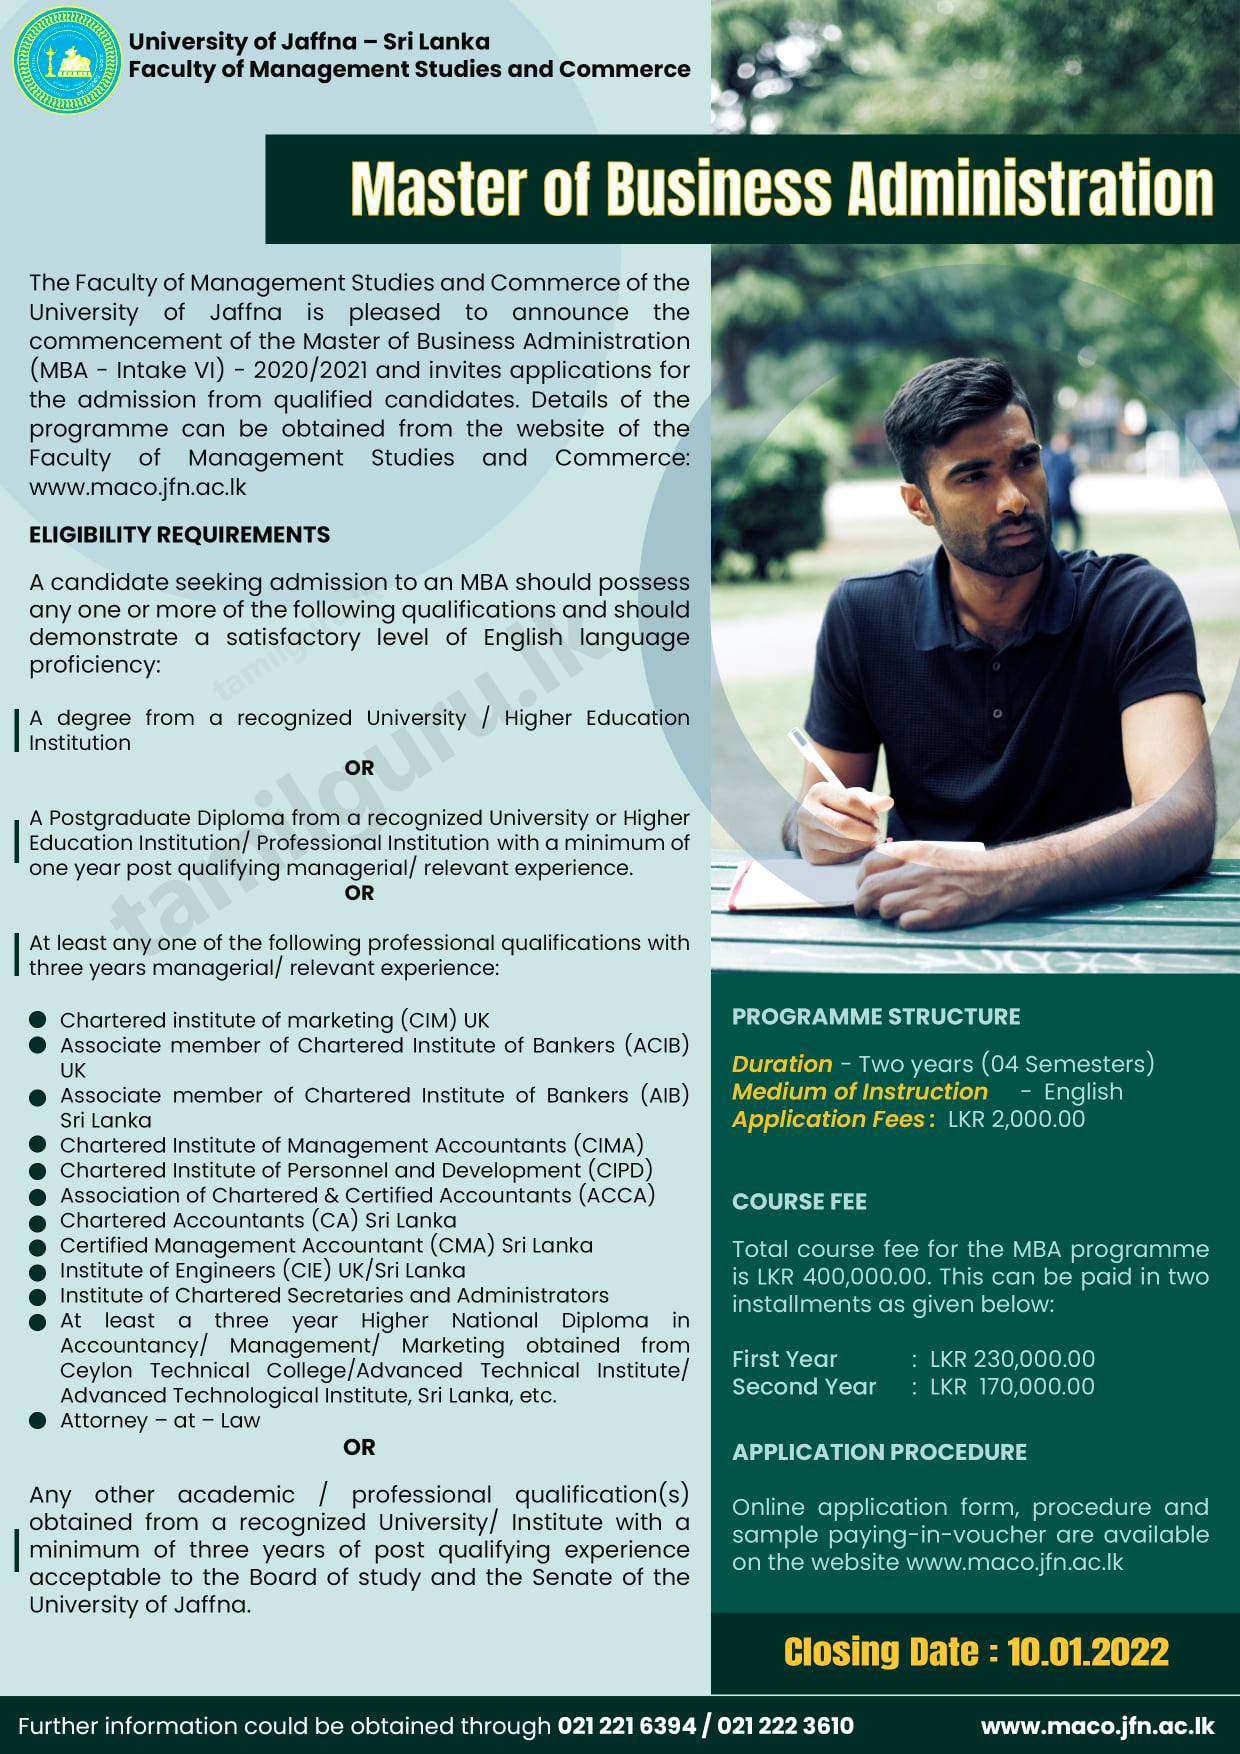 Calling Applications for Master of Business Administration (MBA) 2020/2021 - University of Jaffna - Apply Online